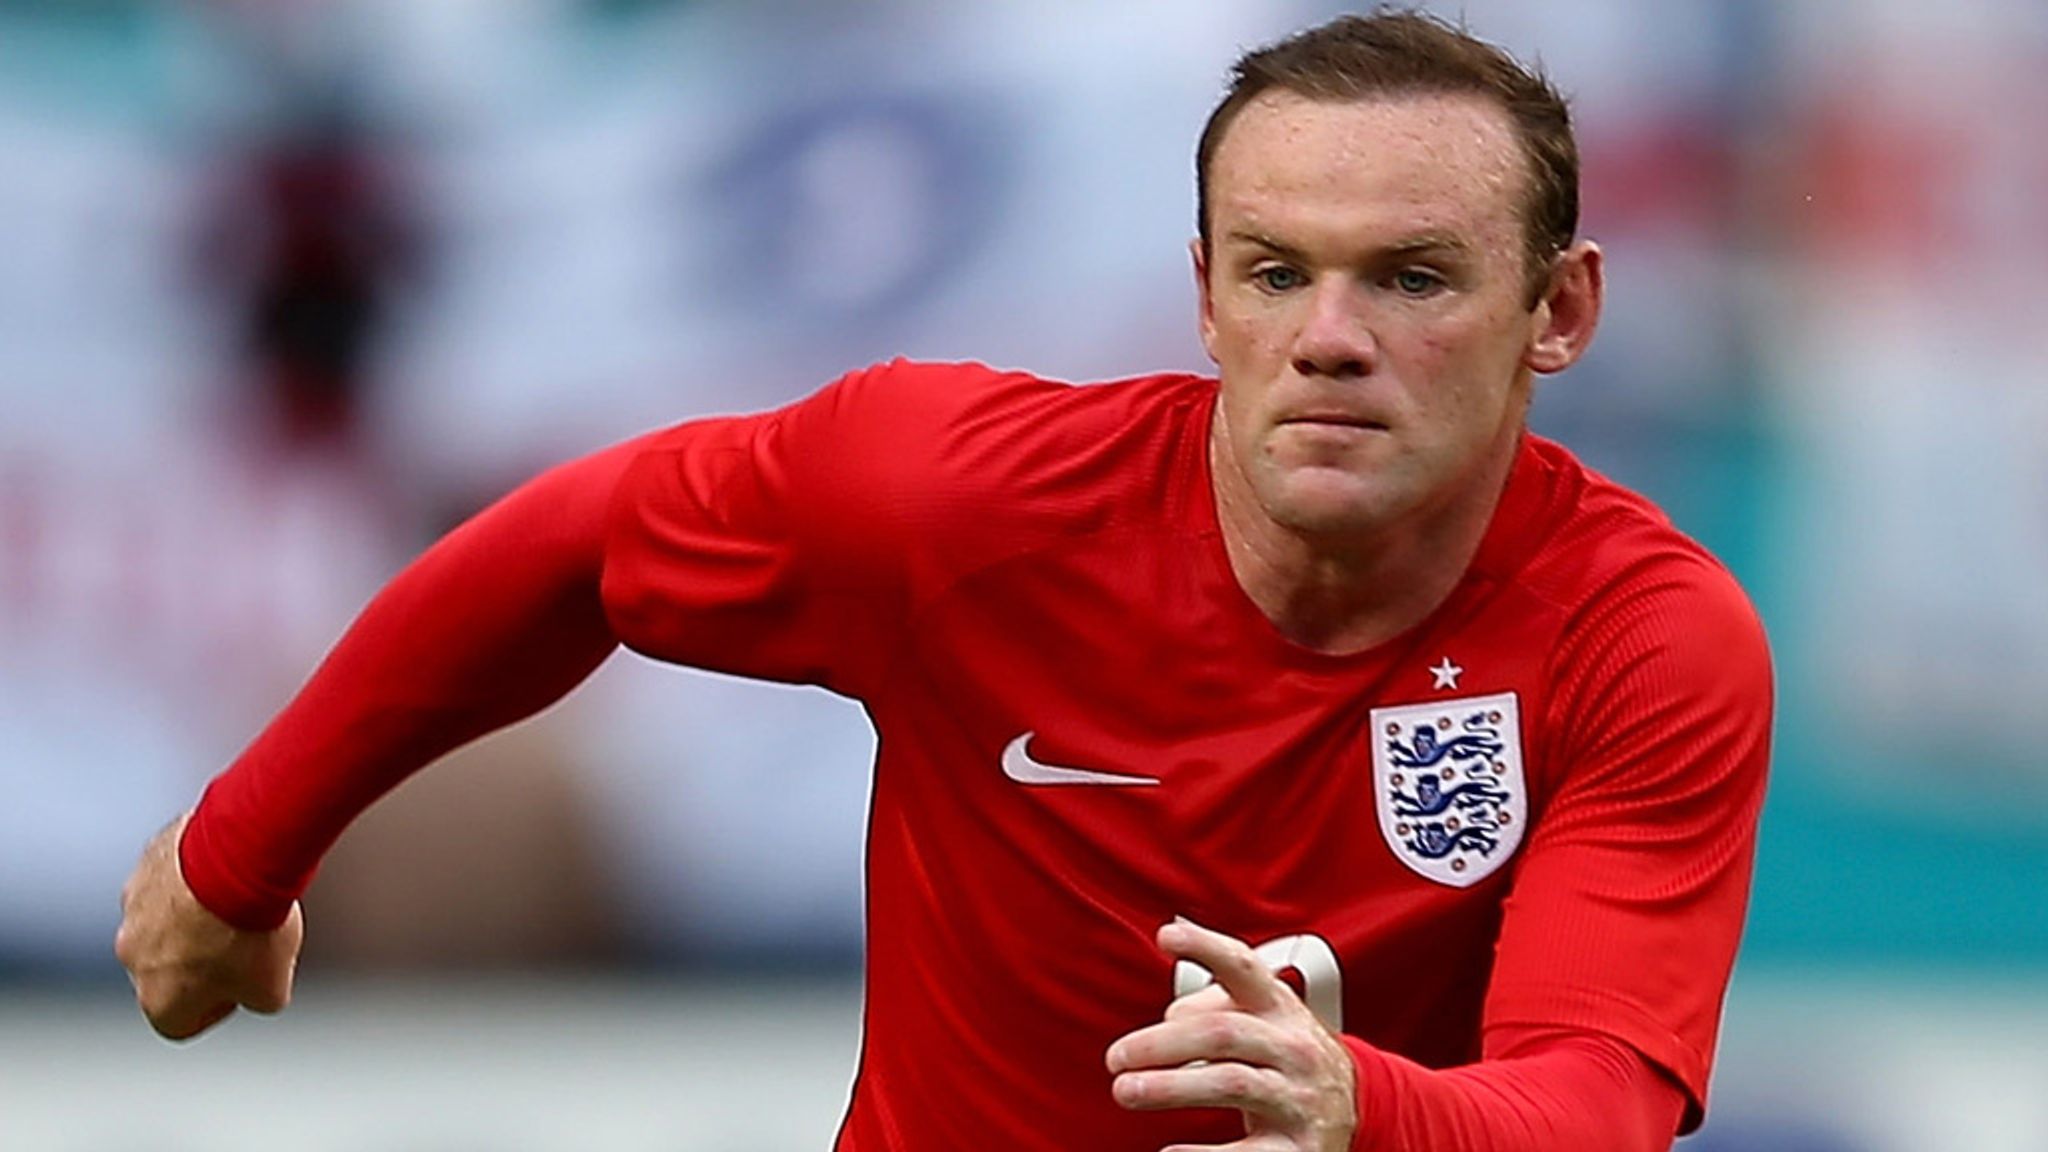  Wayne Rooney is pictured playing for England during a match.